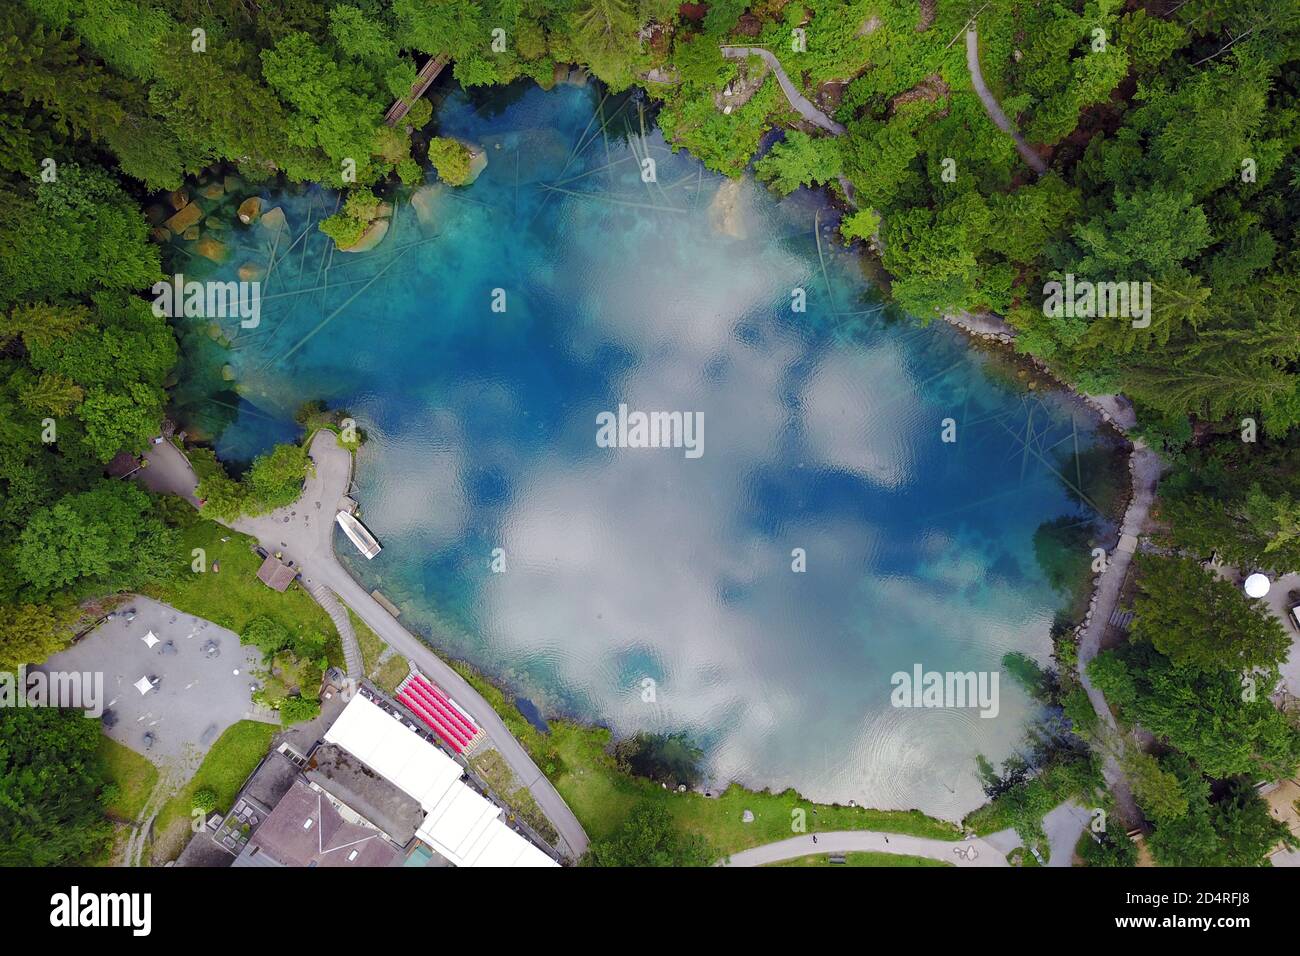 Aerial image of Blausee (Blue Lake) a small mountain lake in Kander Valley in Bernese Oberland, Switzerland Stock Photo